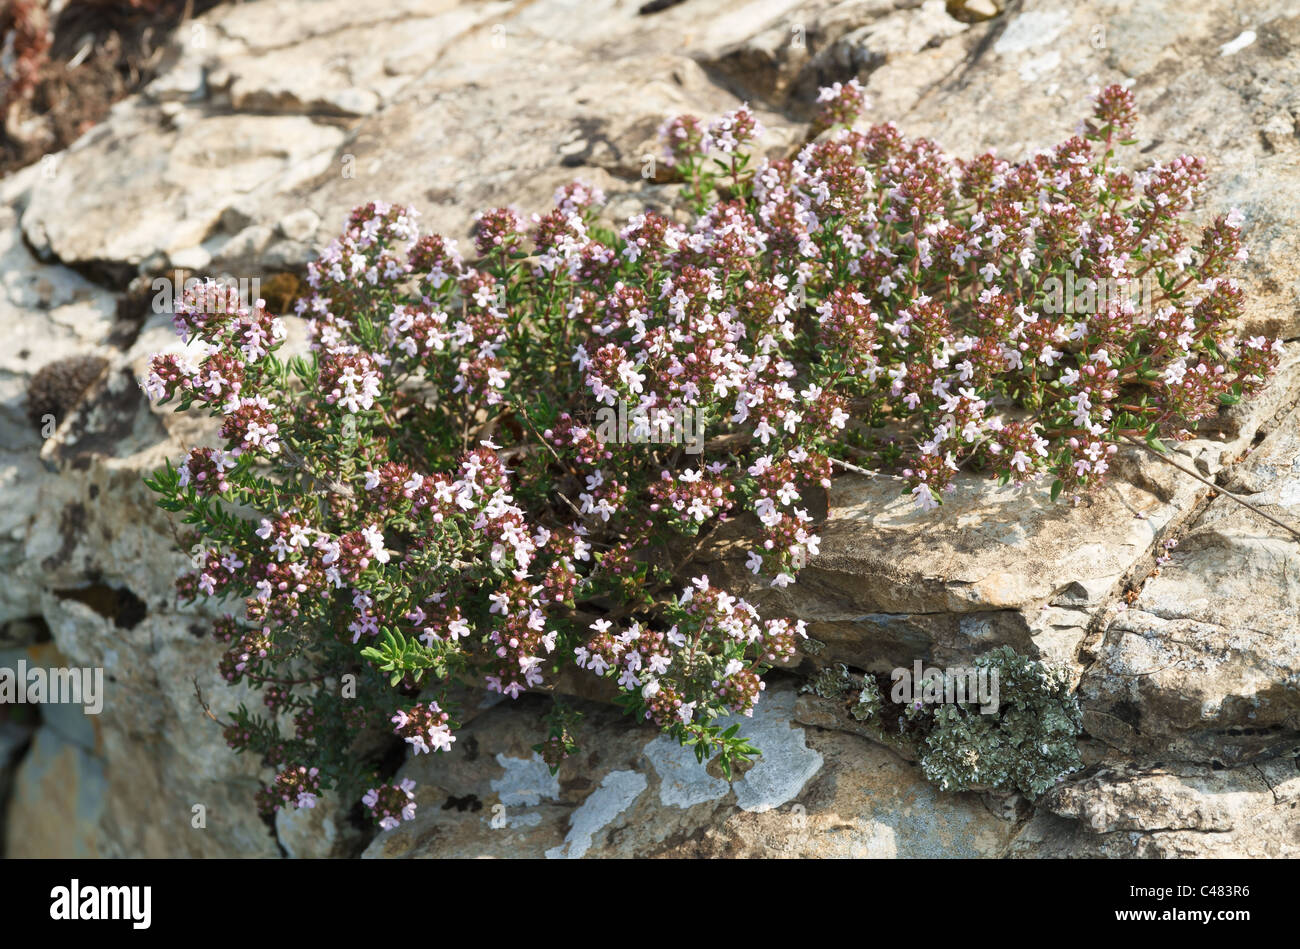 rock with thyme plant with flowers Stock Photo